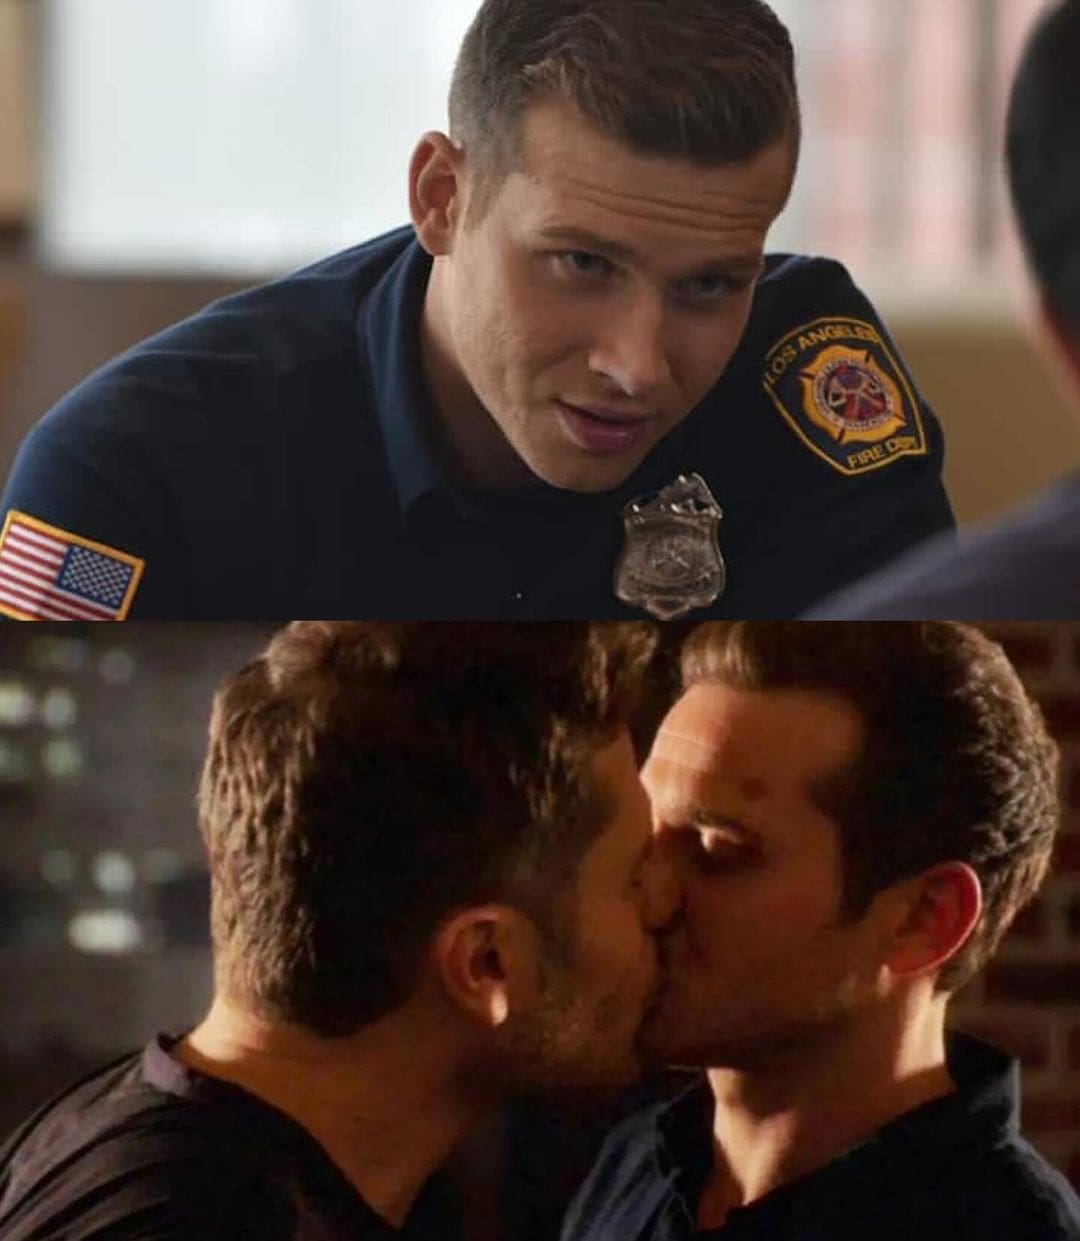 9-1-1’s Oliver Stark Slams Homophobic Backlash to Buck’s Kiss: ‘You’ve Missed the Entire Point of the Show’